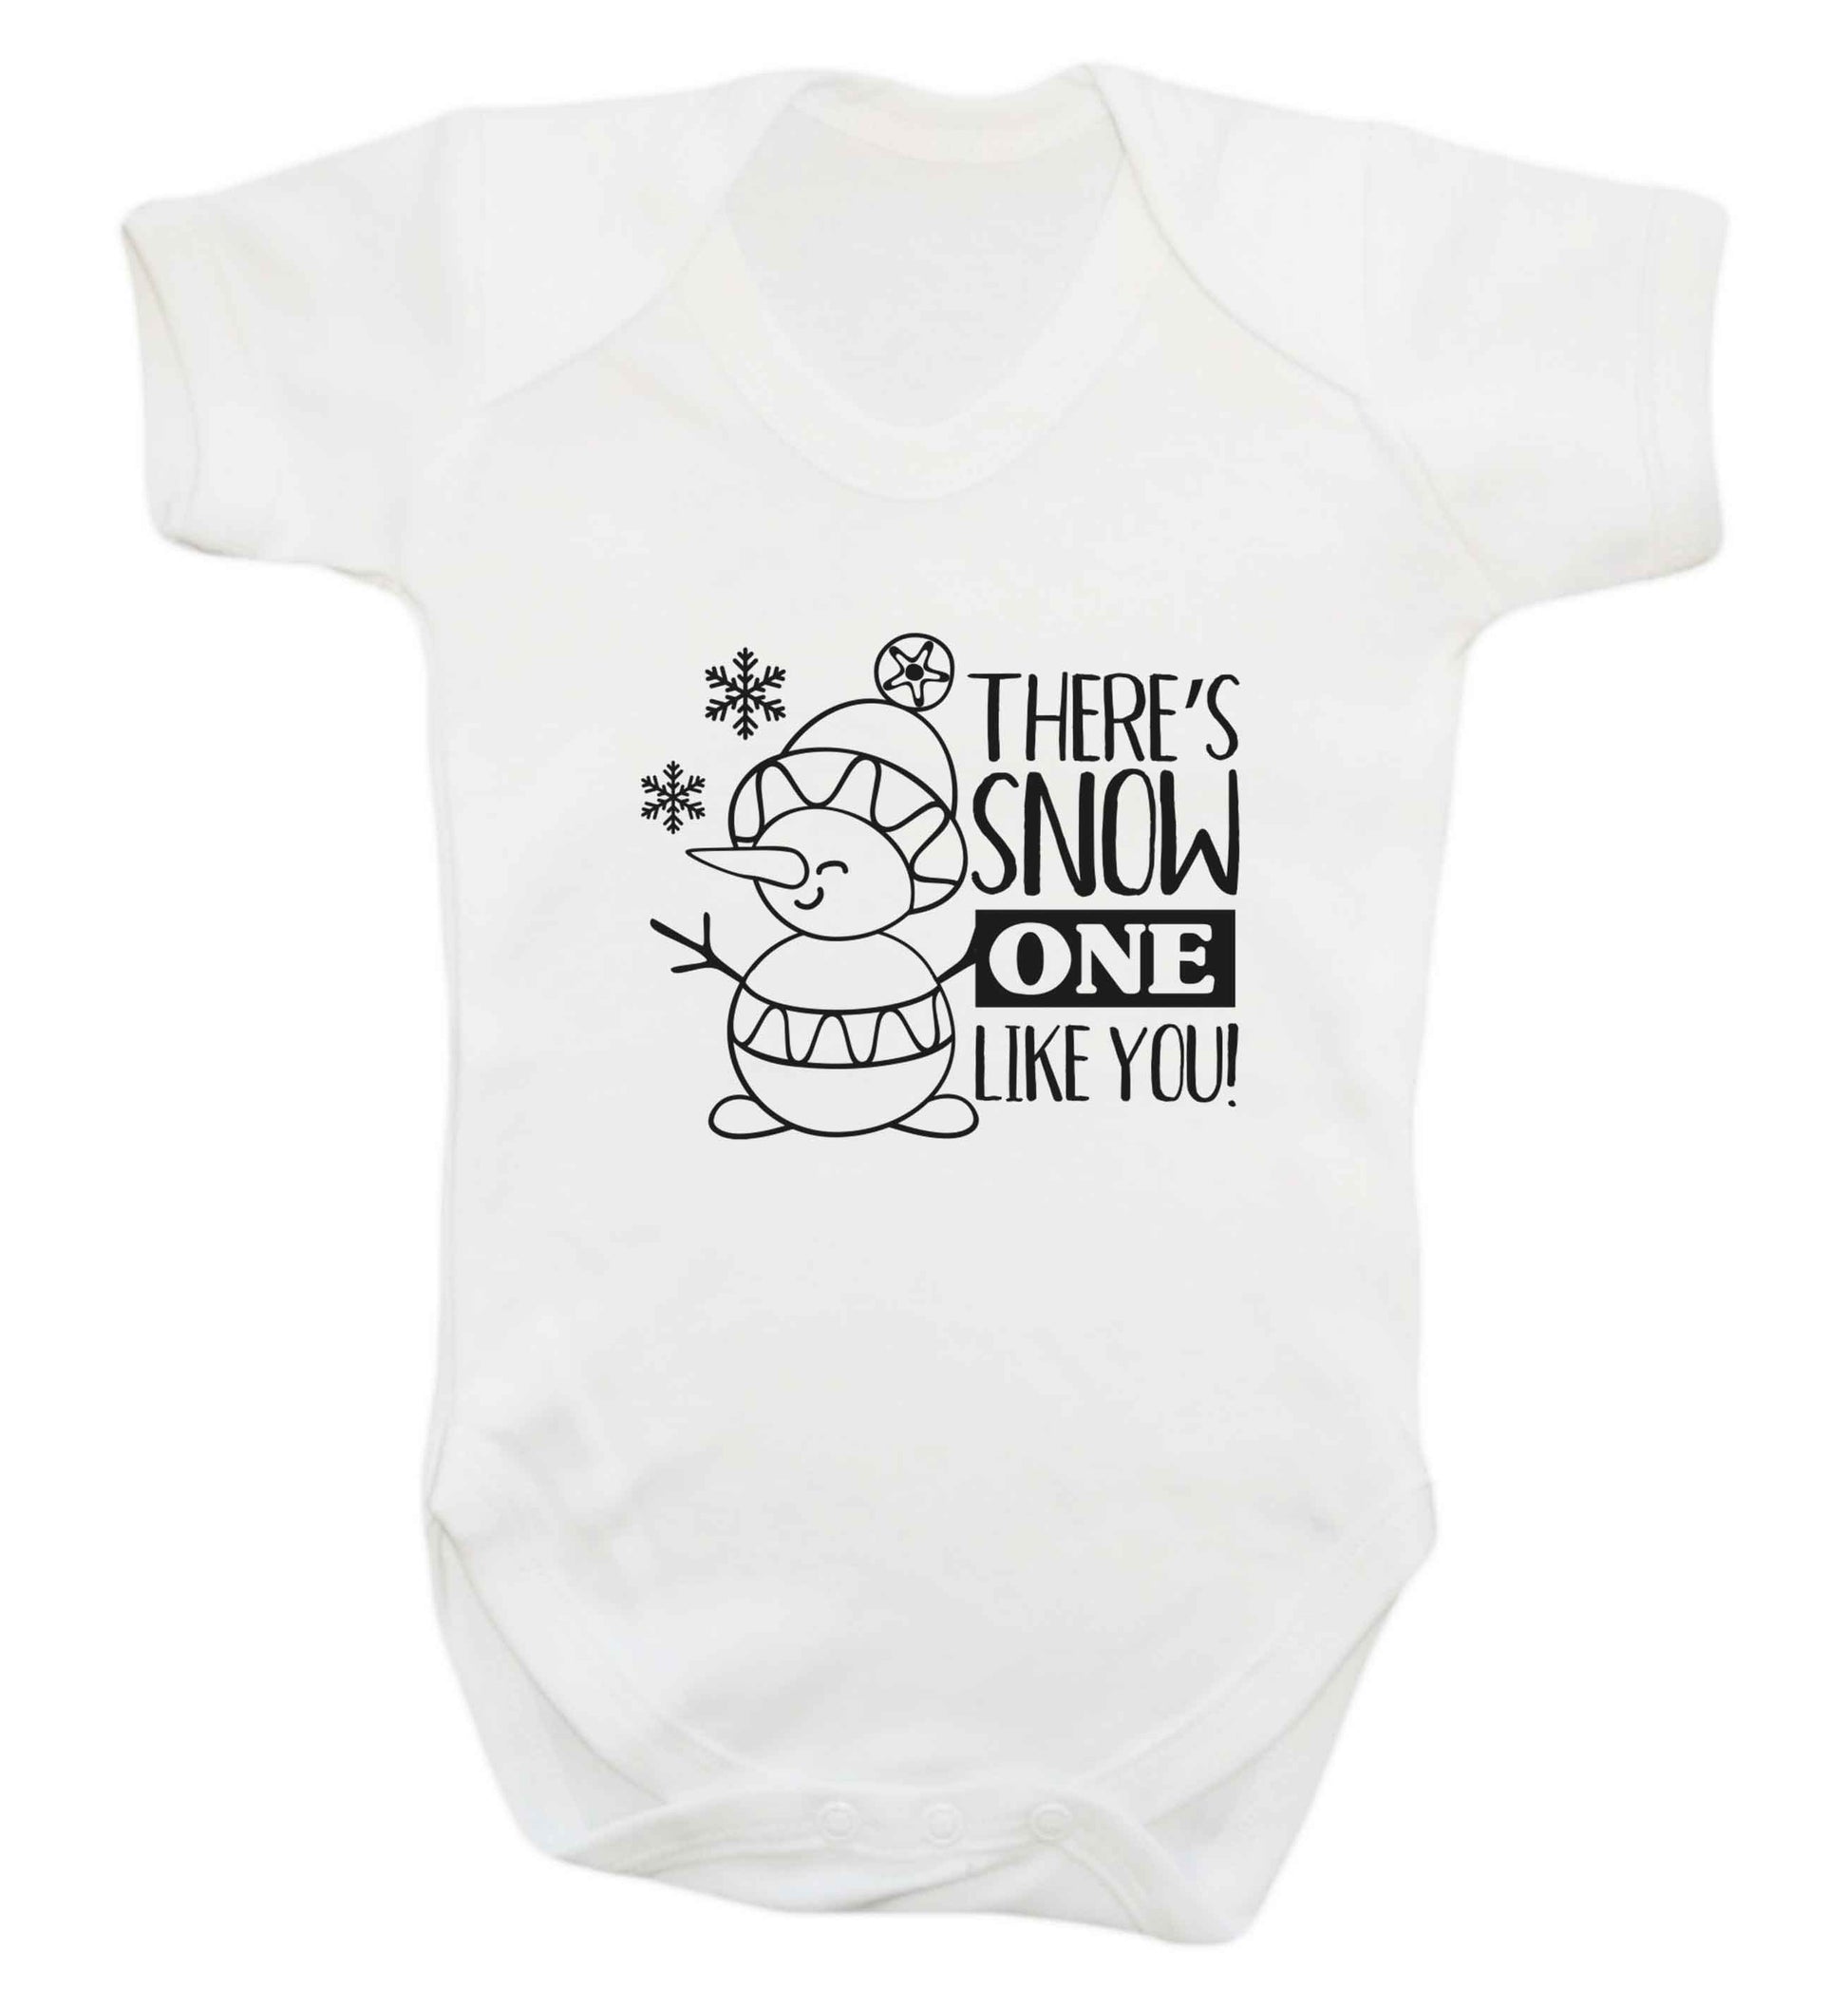 There's snow one like you baby vest white 18-24 months